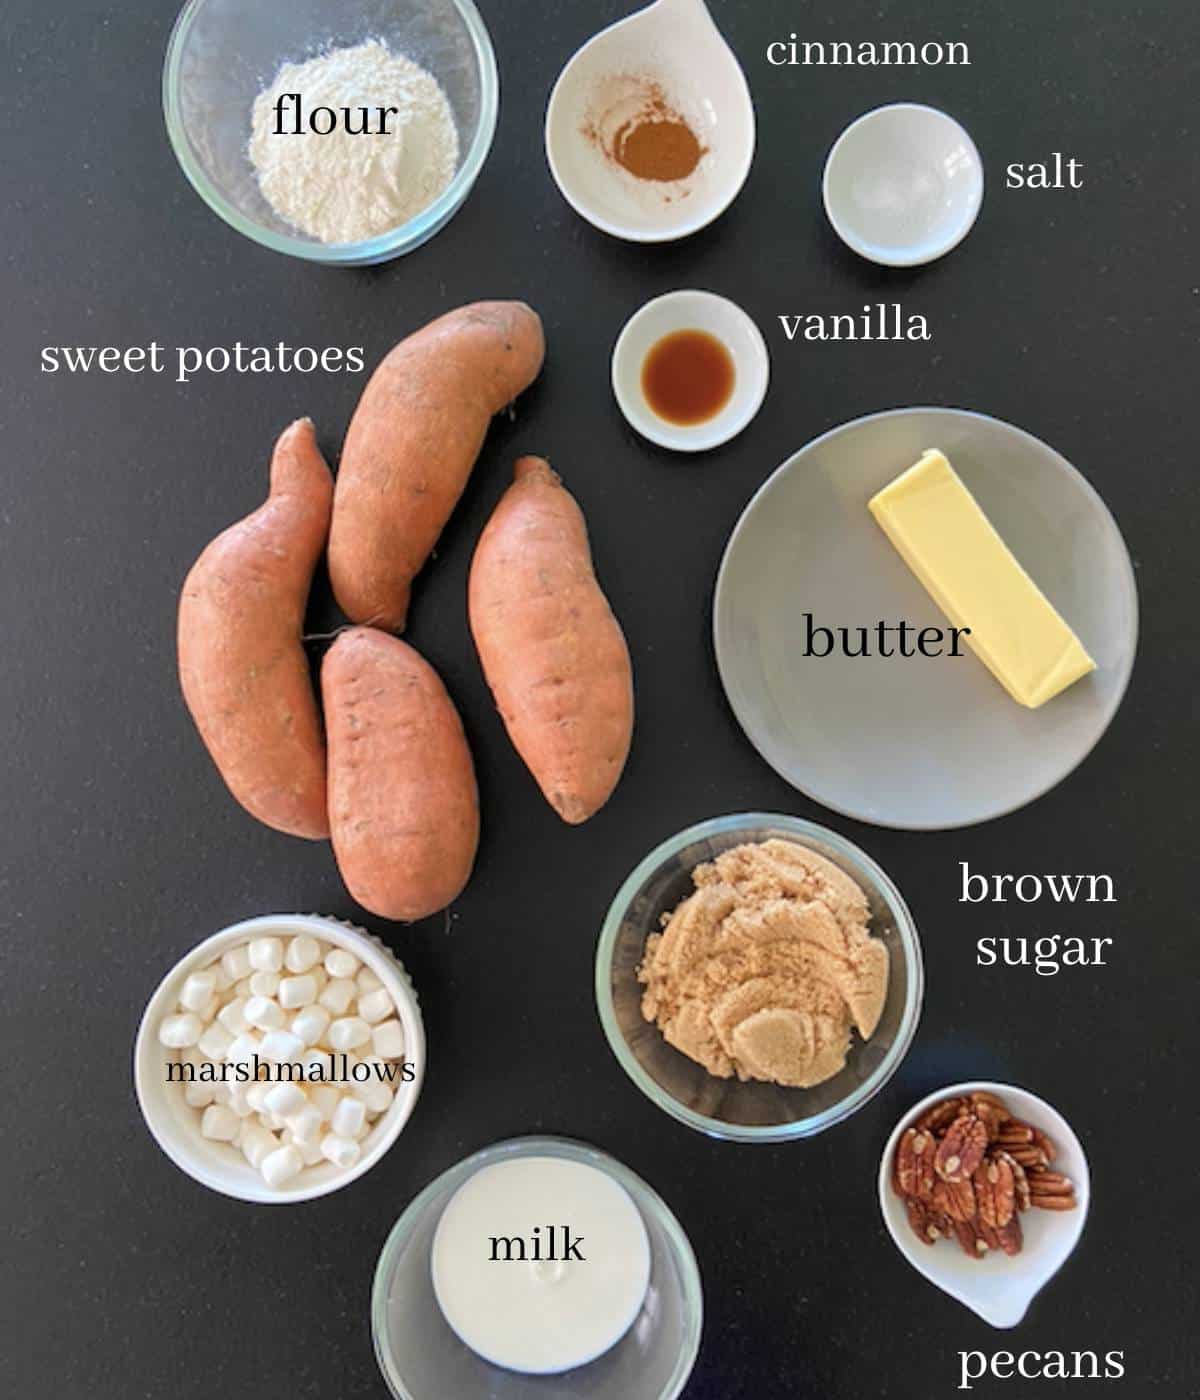 Ingredients for sweet potato casserole on countertop.